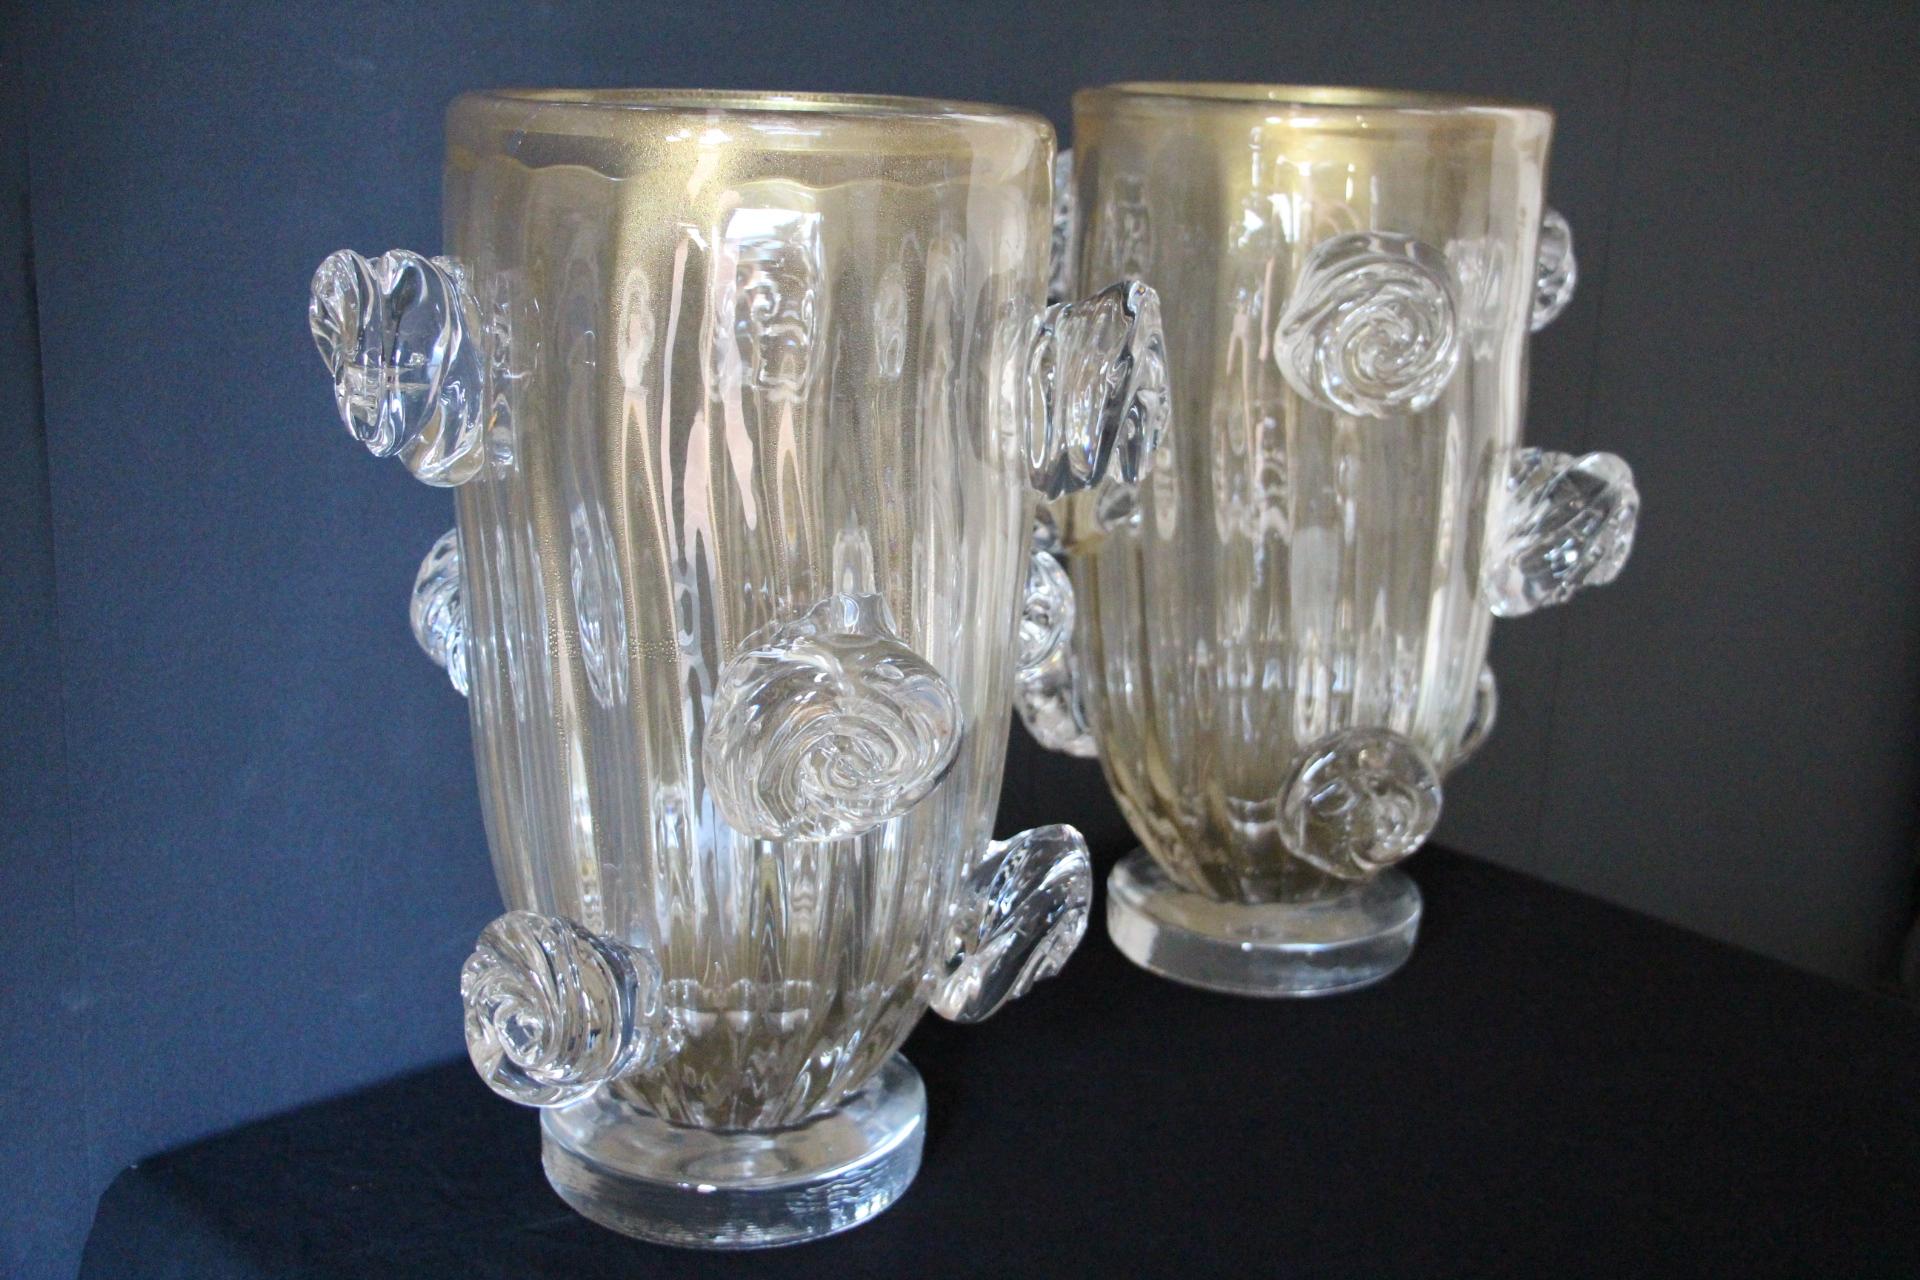 Mid-Century Modern Pair of Large Golden Murano Glass Vases With Roses Decor by Costantini